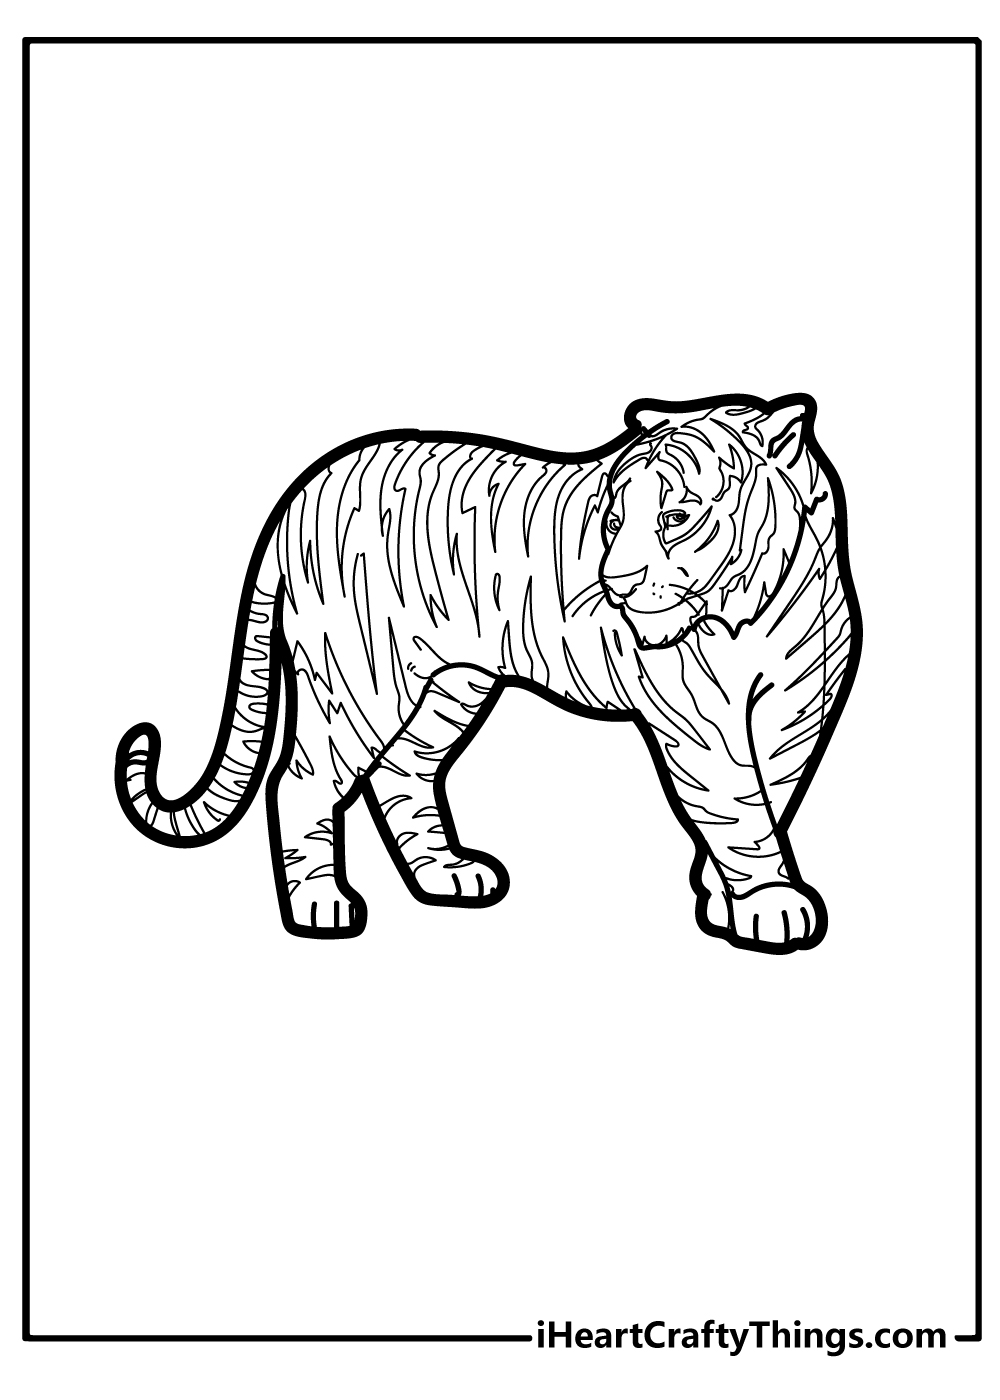 Tiger Coloring Pages for preschoolers free printable